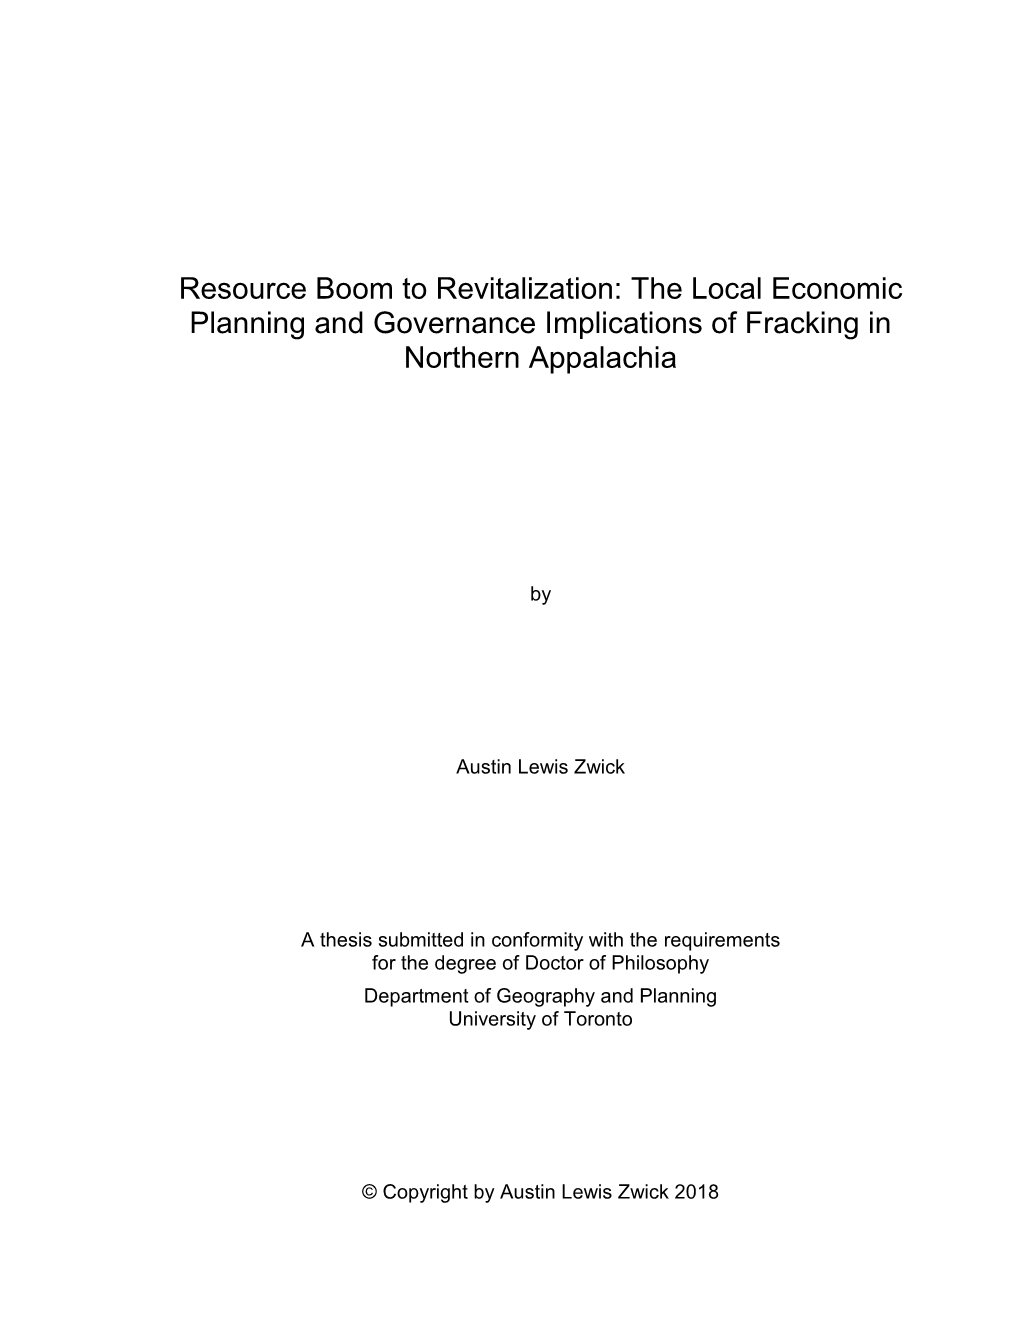 Resource Boom to Revitalization: the Local Economic Planning and Governance Implications of Fracking in Northern Appalachia